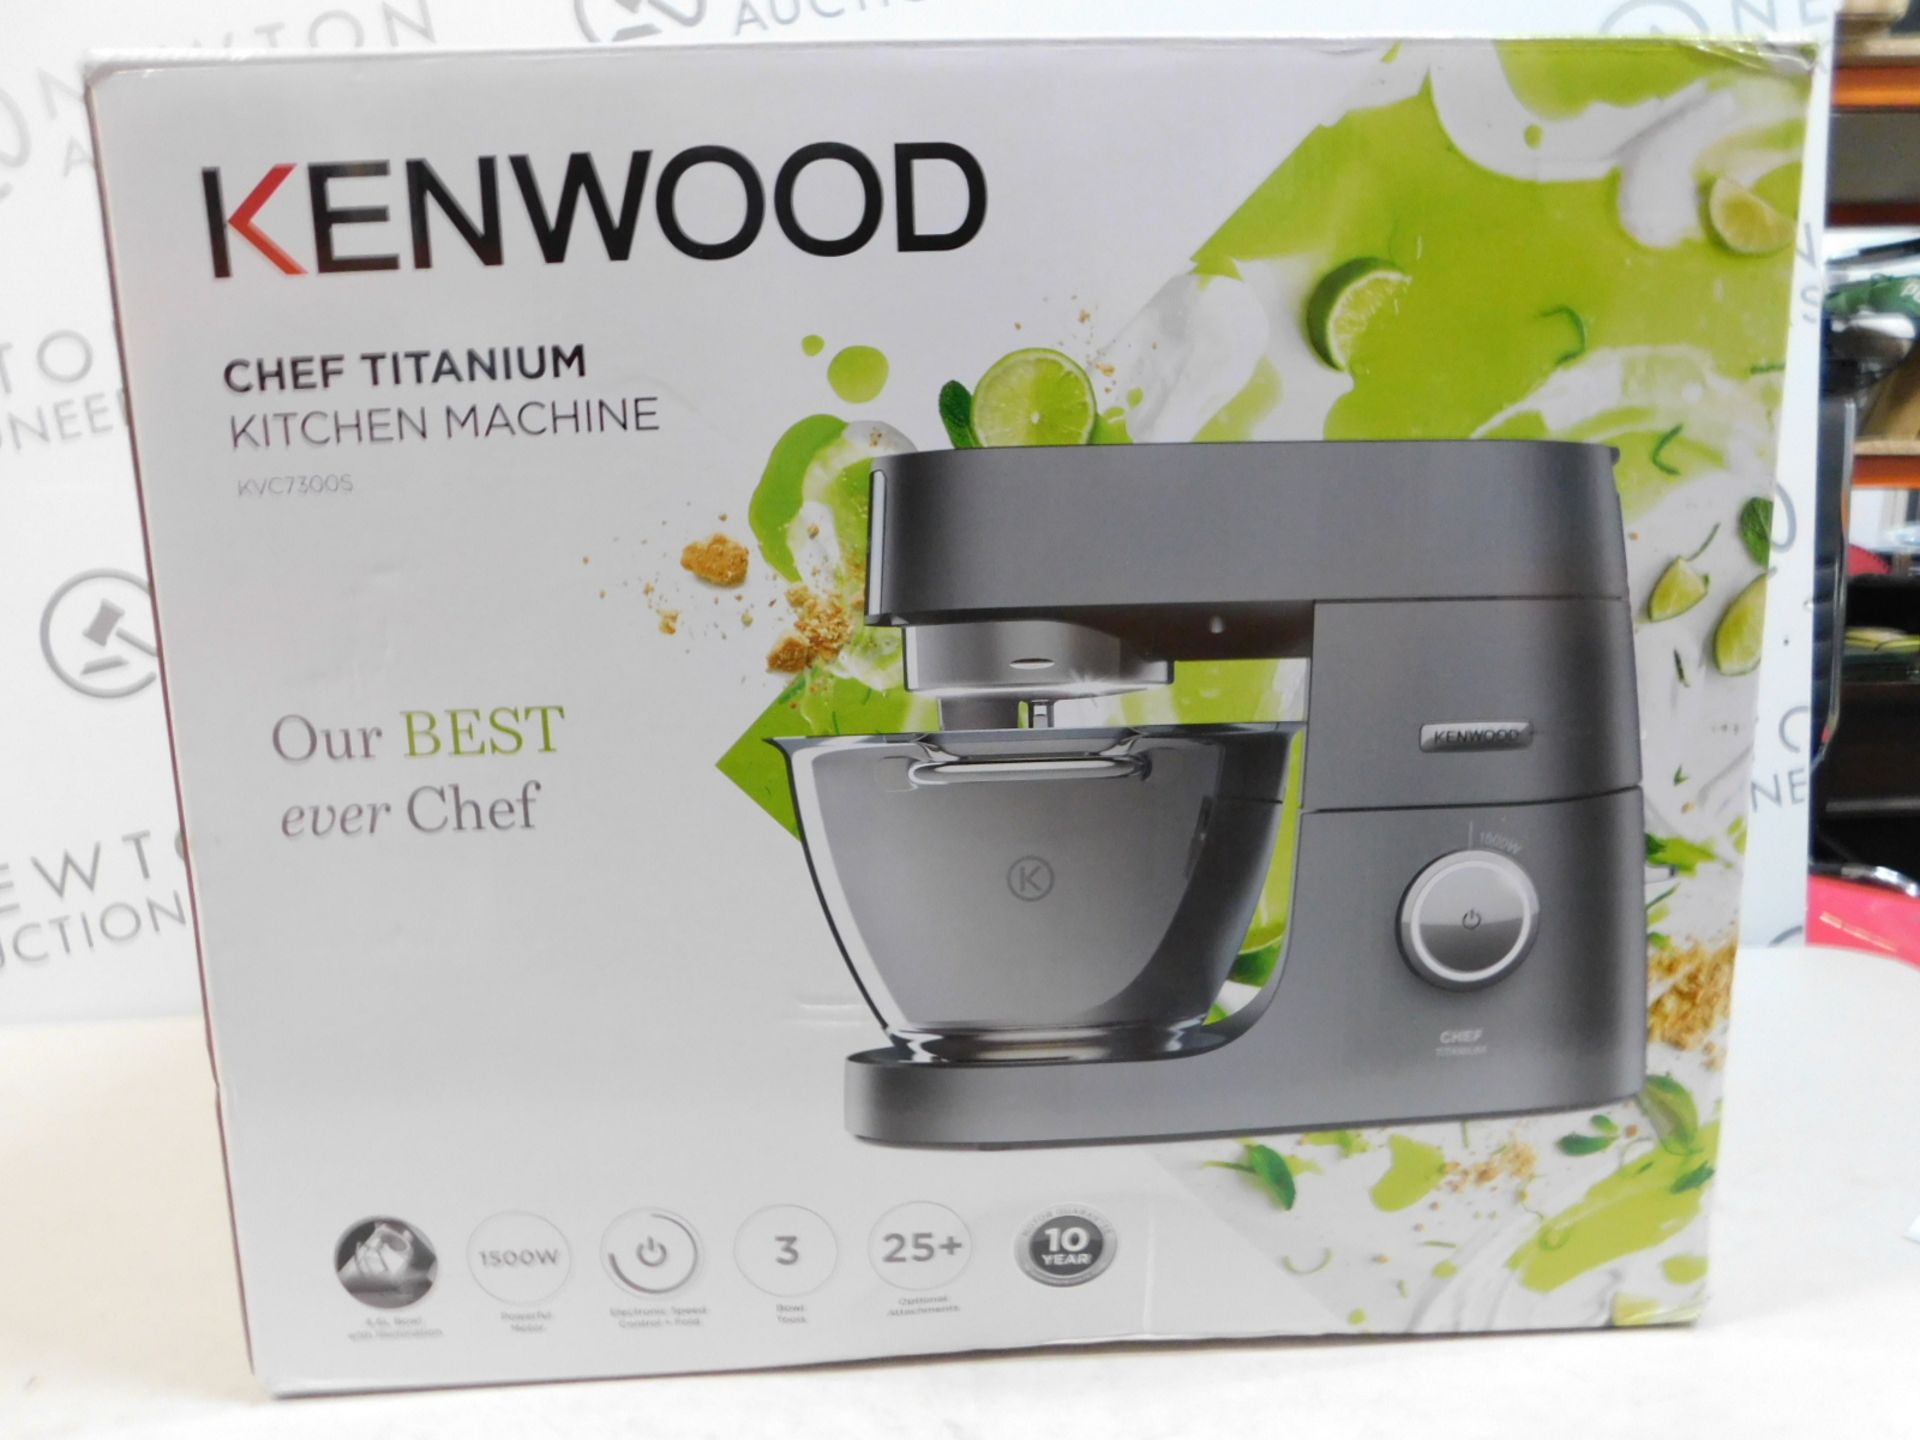 1 BOXED KENWOOD KVC3110S CHEF TITANIUM 4.6L STAND MIXER WITH ACCESSORIES RRP Â£449.99